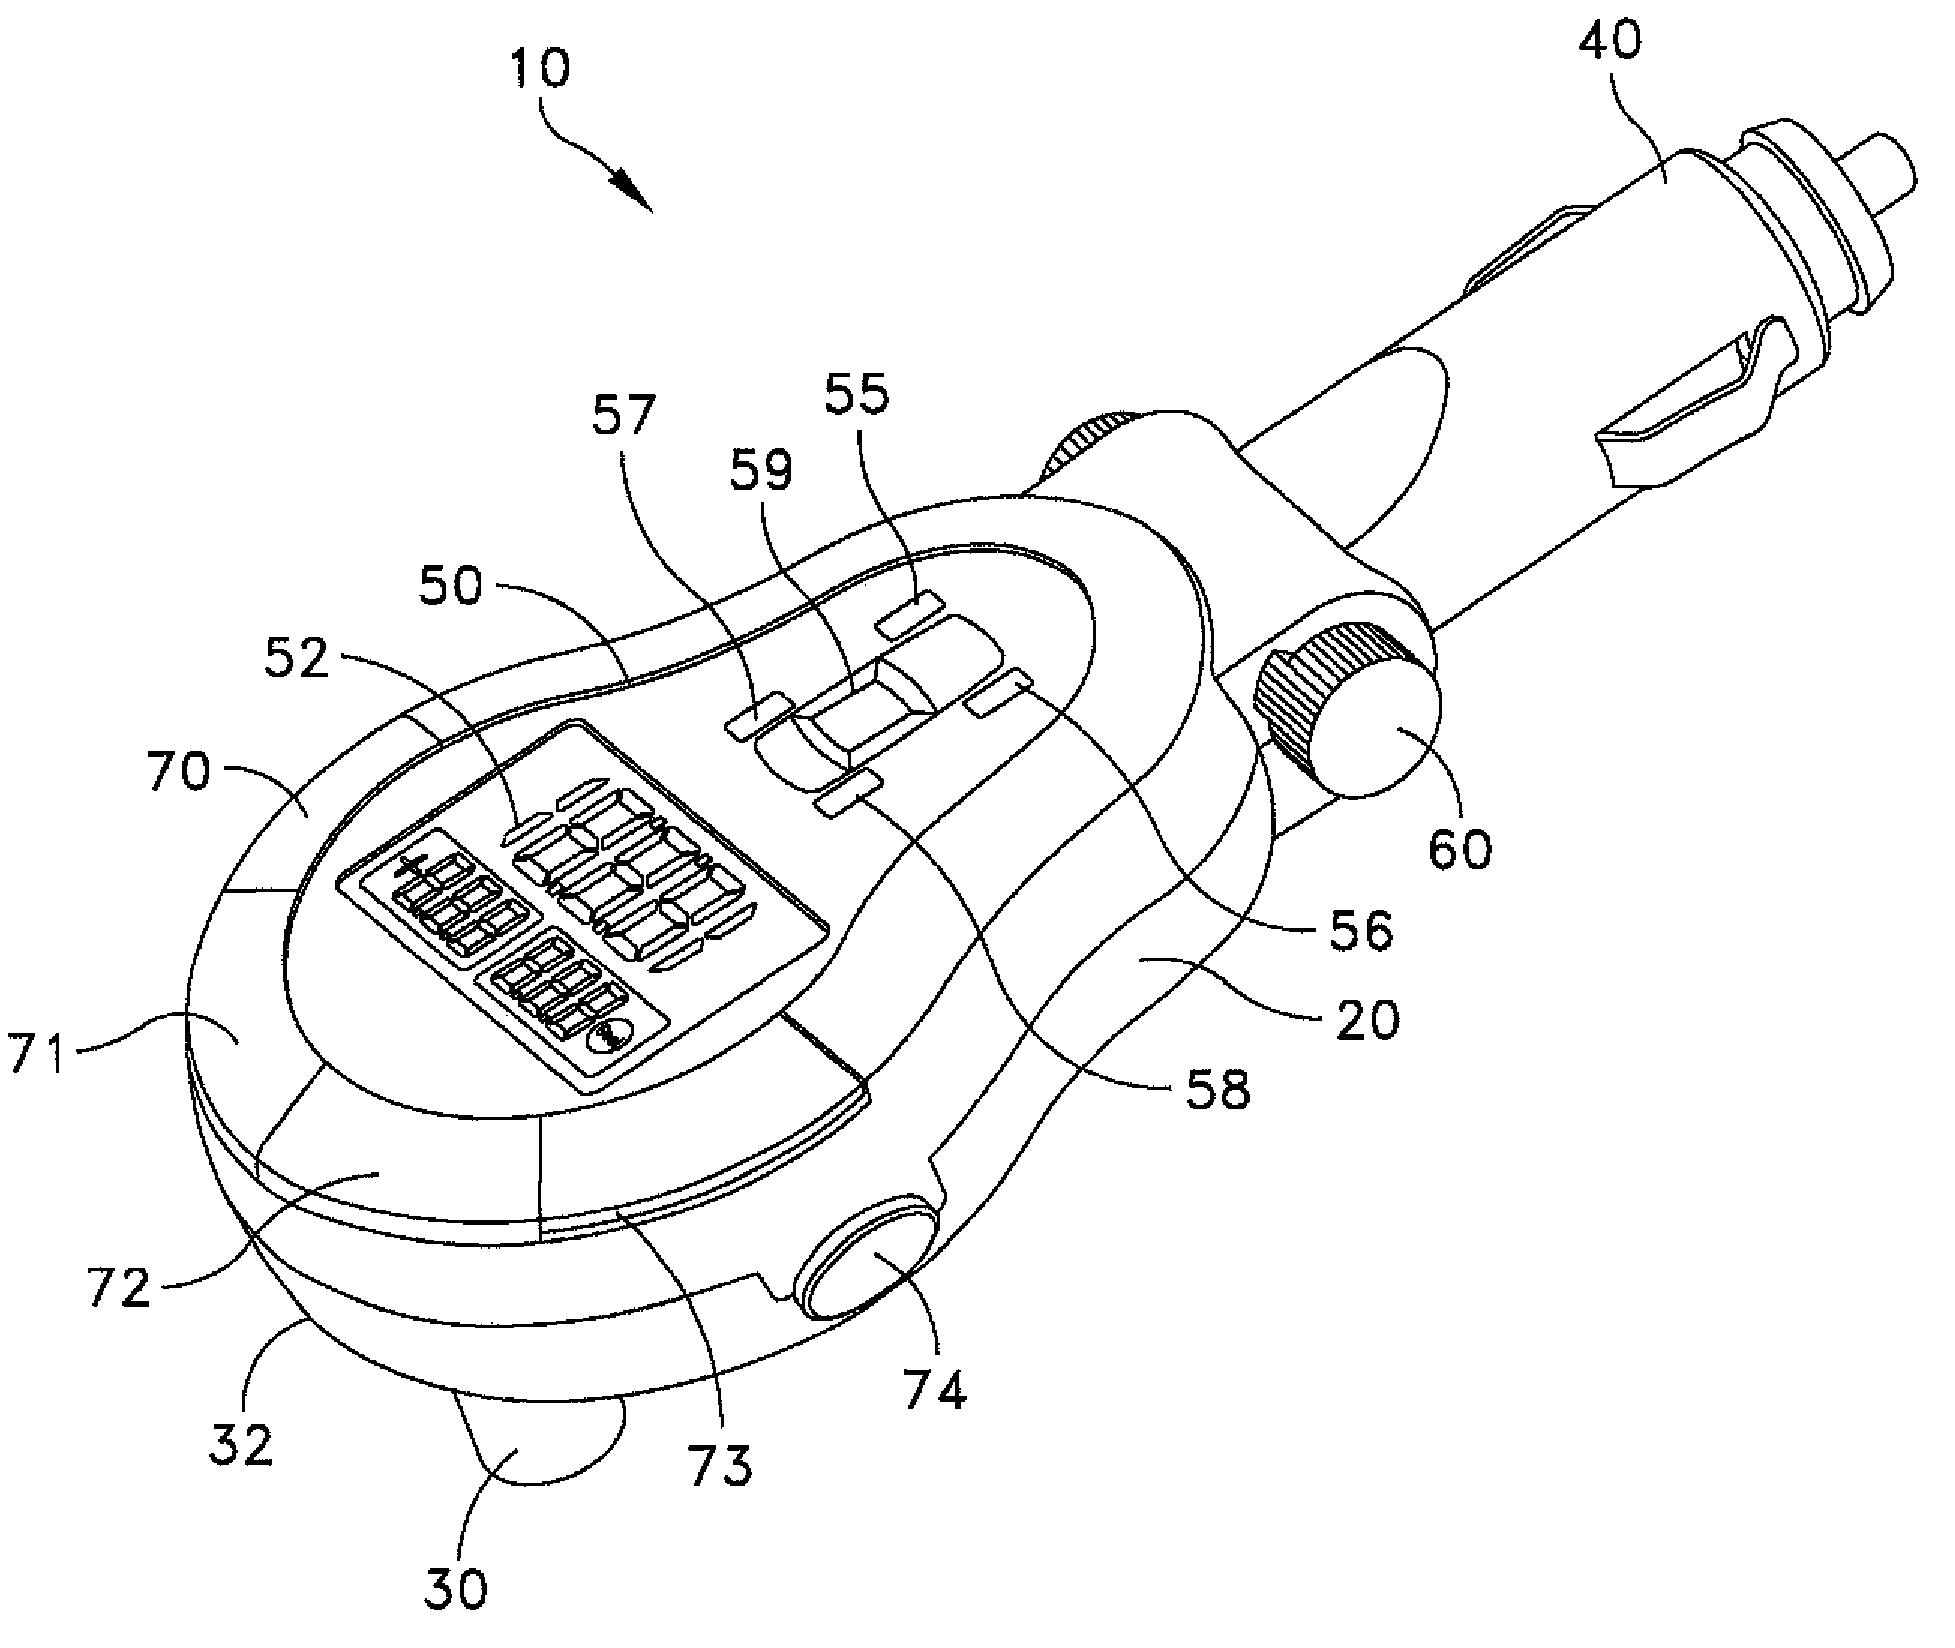 Combined tire pressure gauge and remote tire pressure display